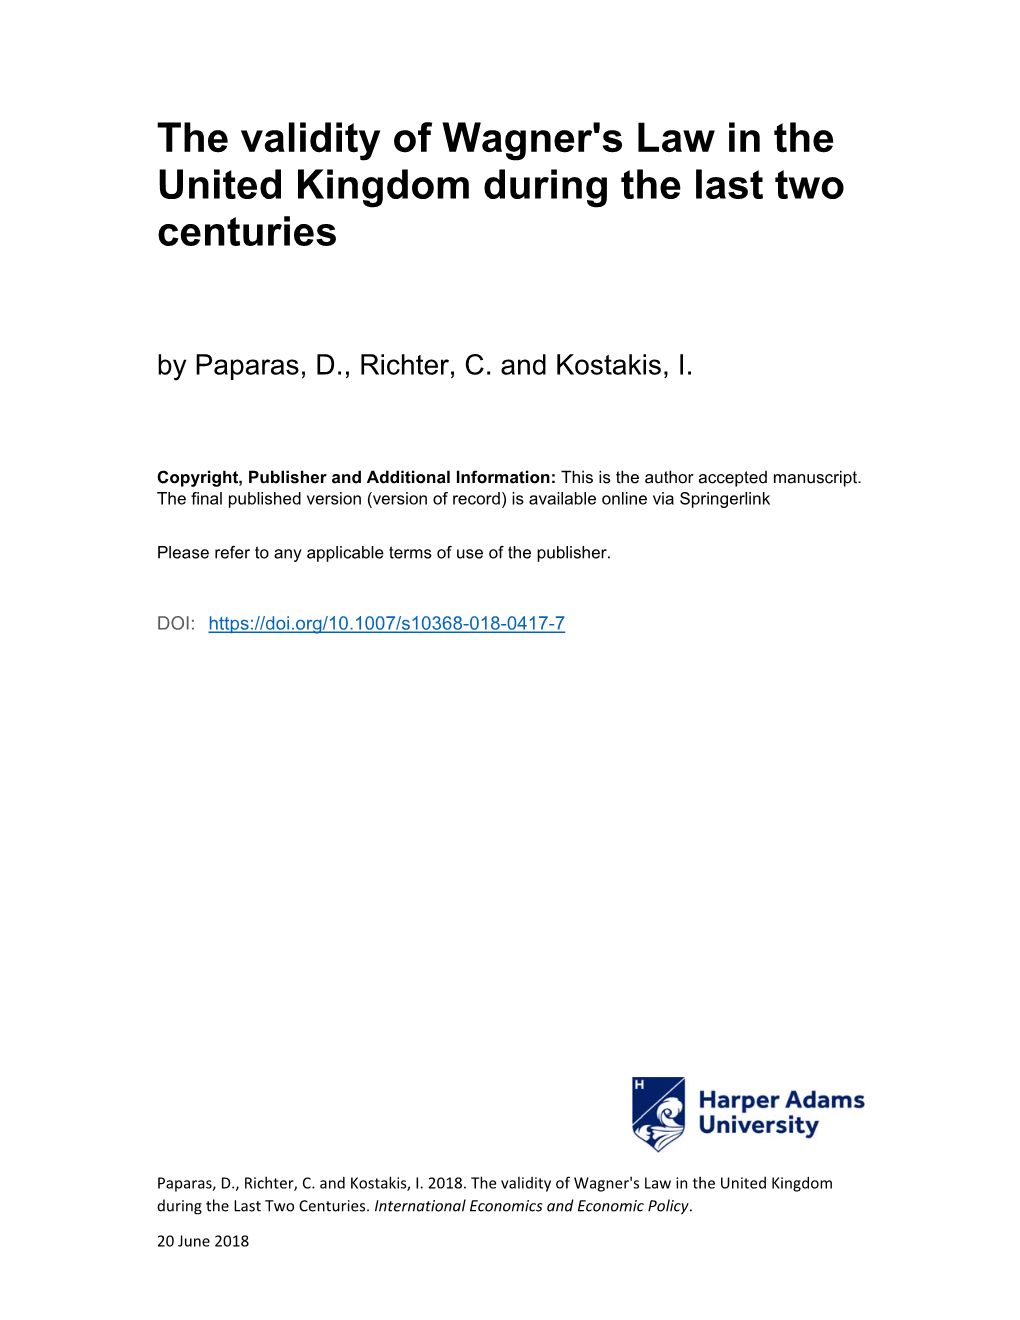 The Validity of Wagner's Law in the United Kingdom During the Last Two Centuries